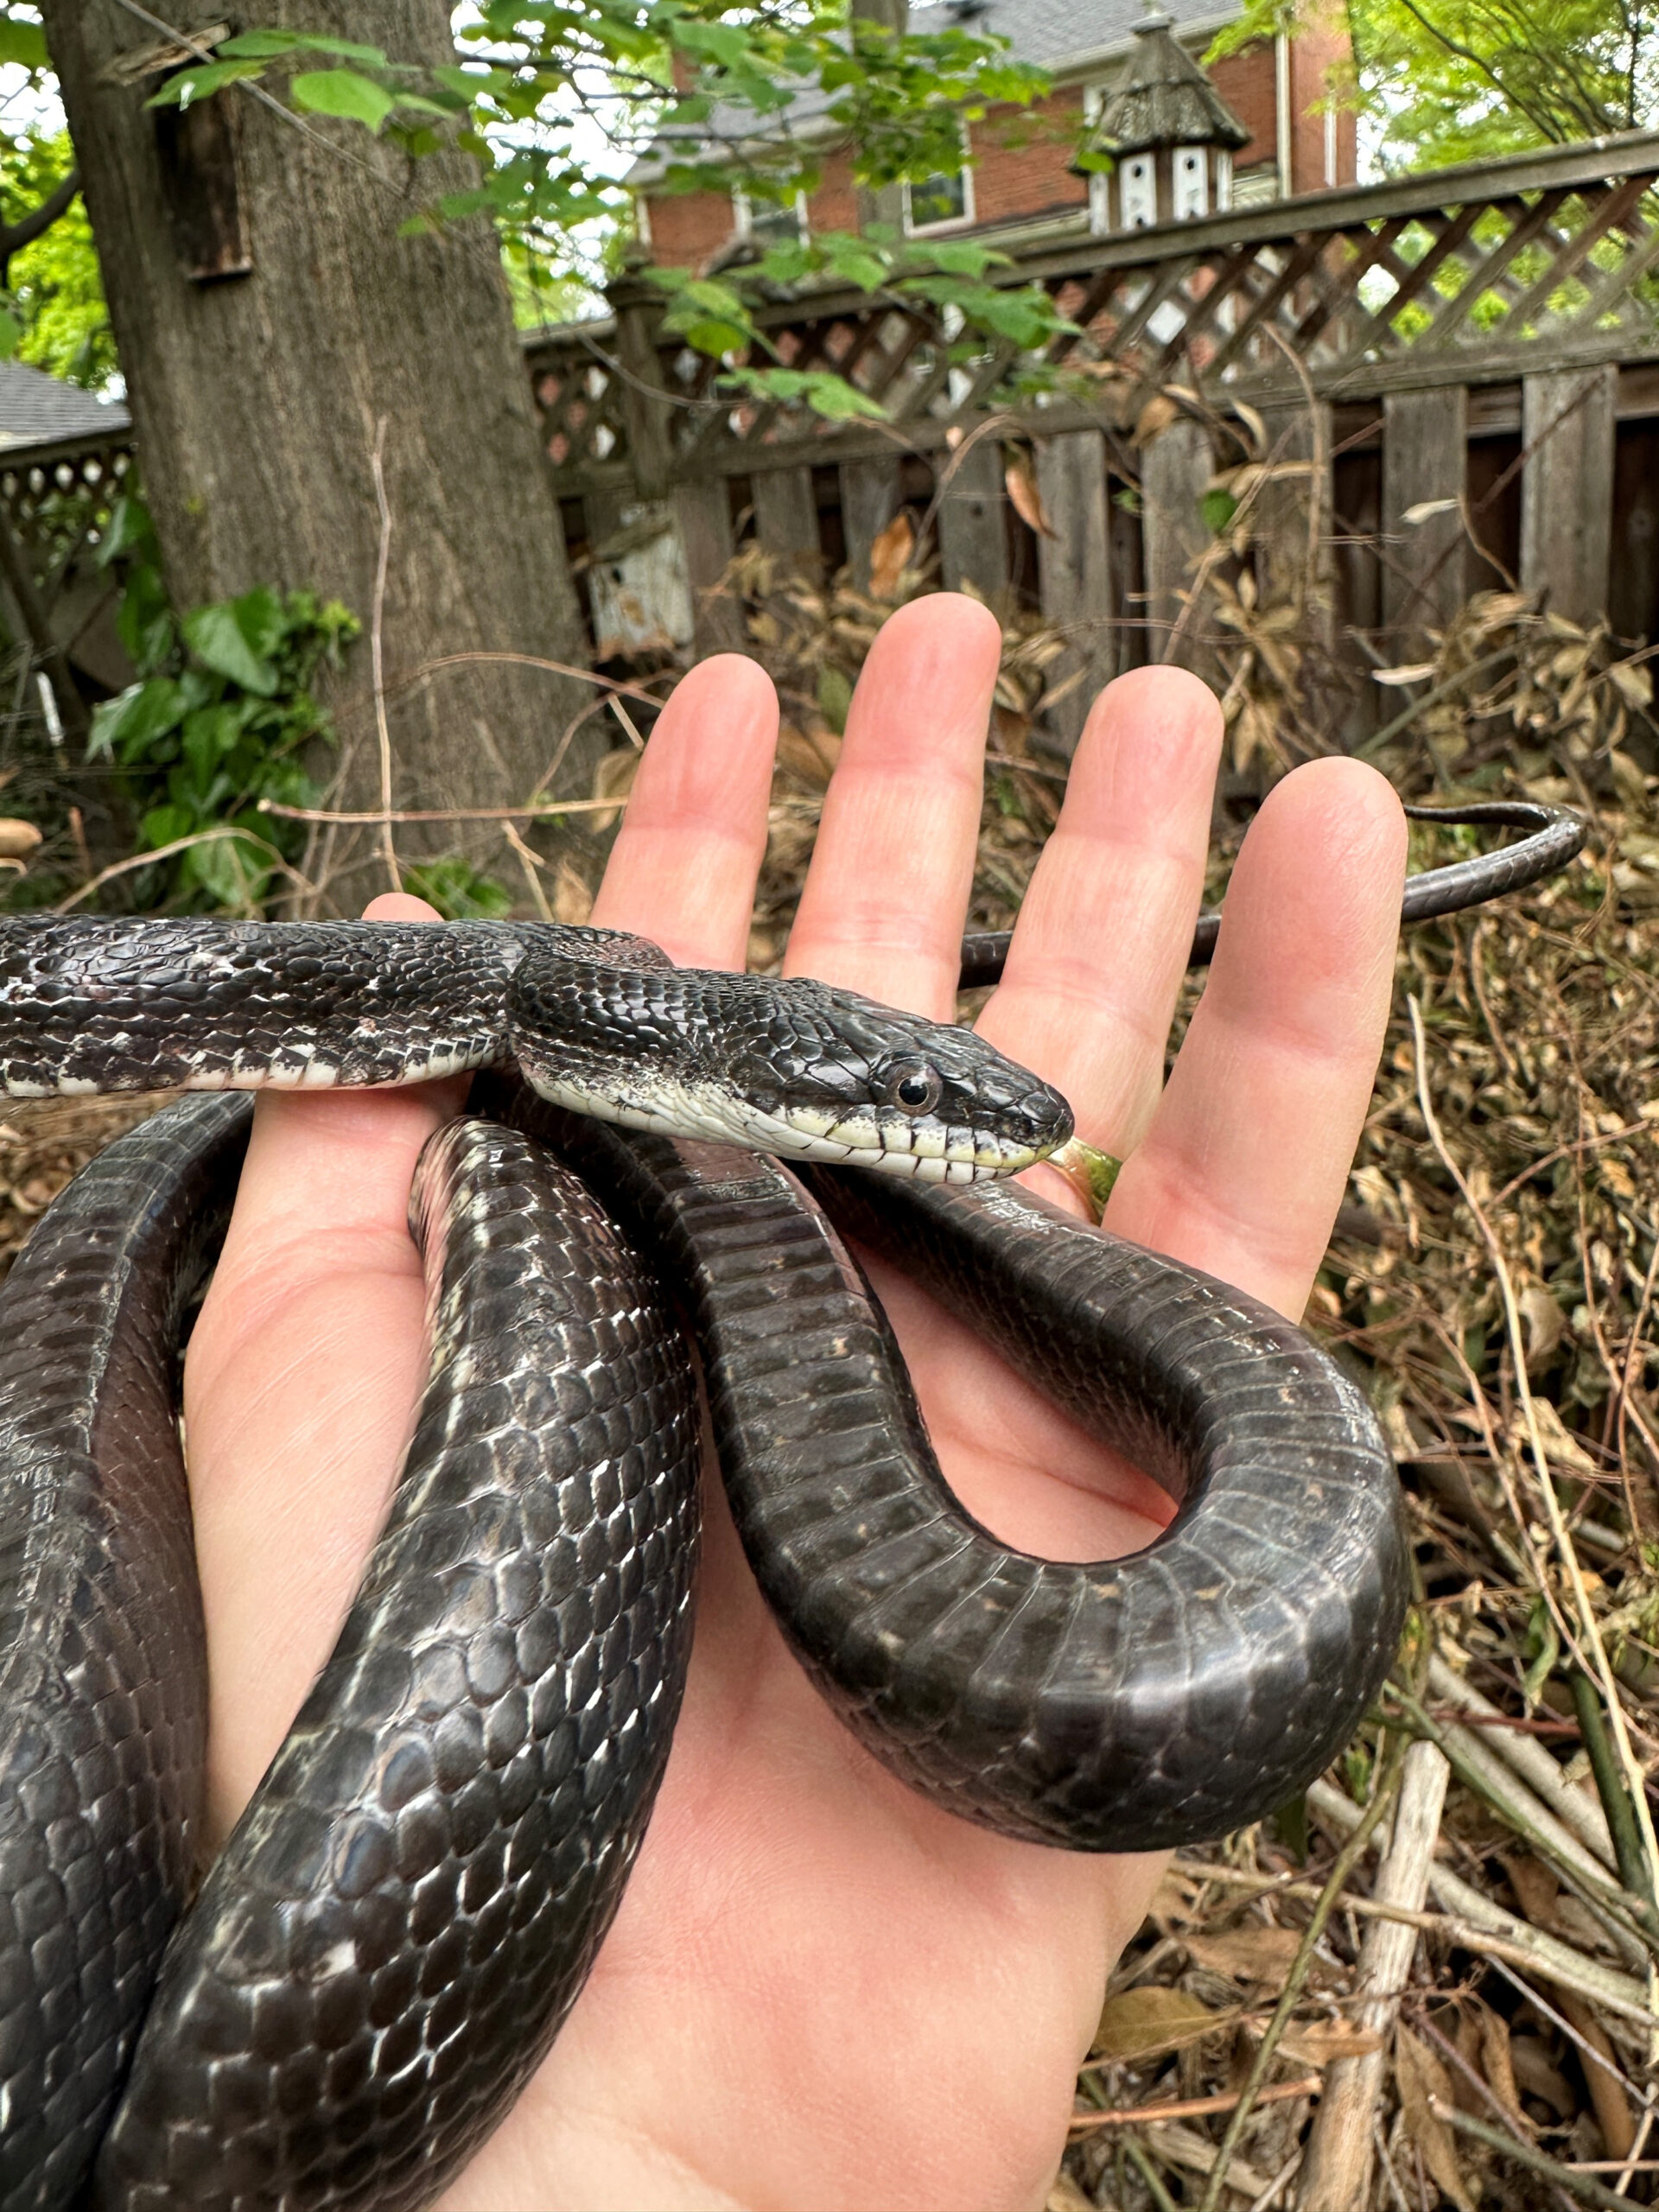 College Park Wild: Snakes in the suburbs: All black snakes are not the same